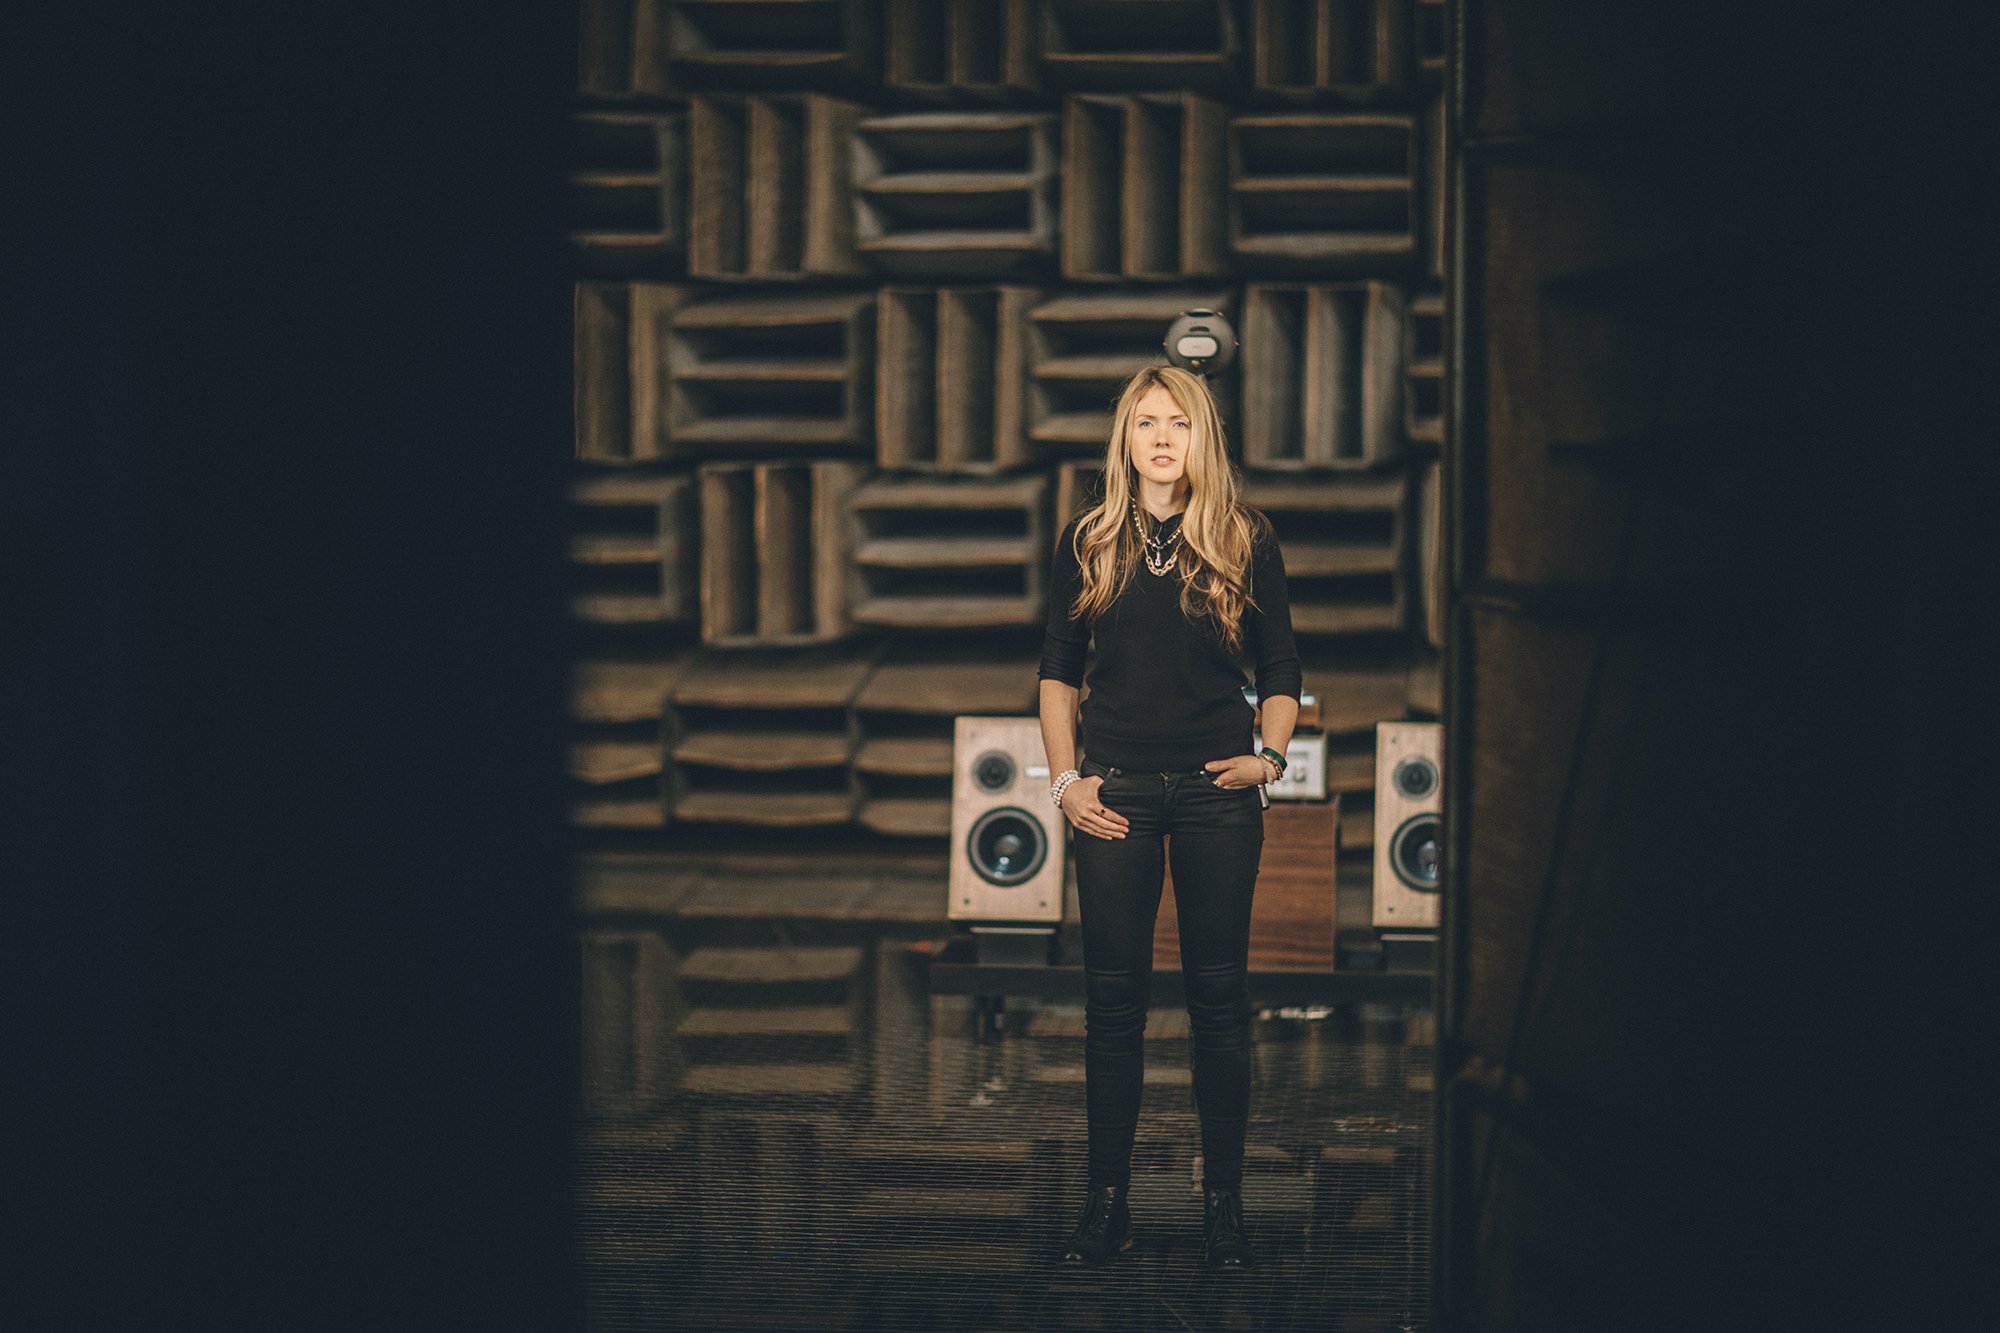 Beatie Wolfe - 2017 Raw Space - in Bell Labs Anechoic Chamber with turntable by Veanne Cao (2).jpg